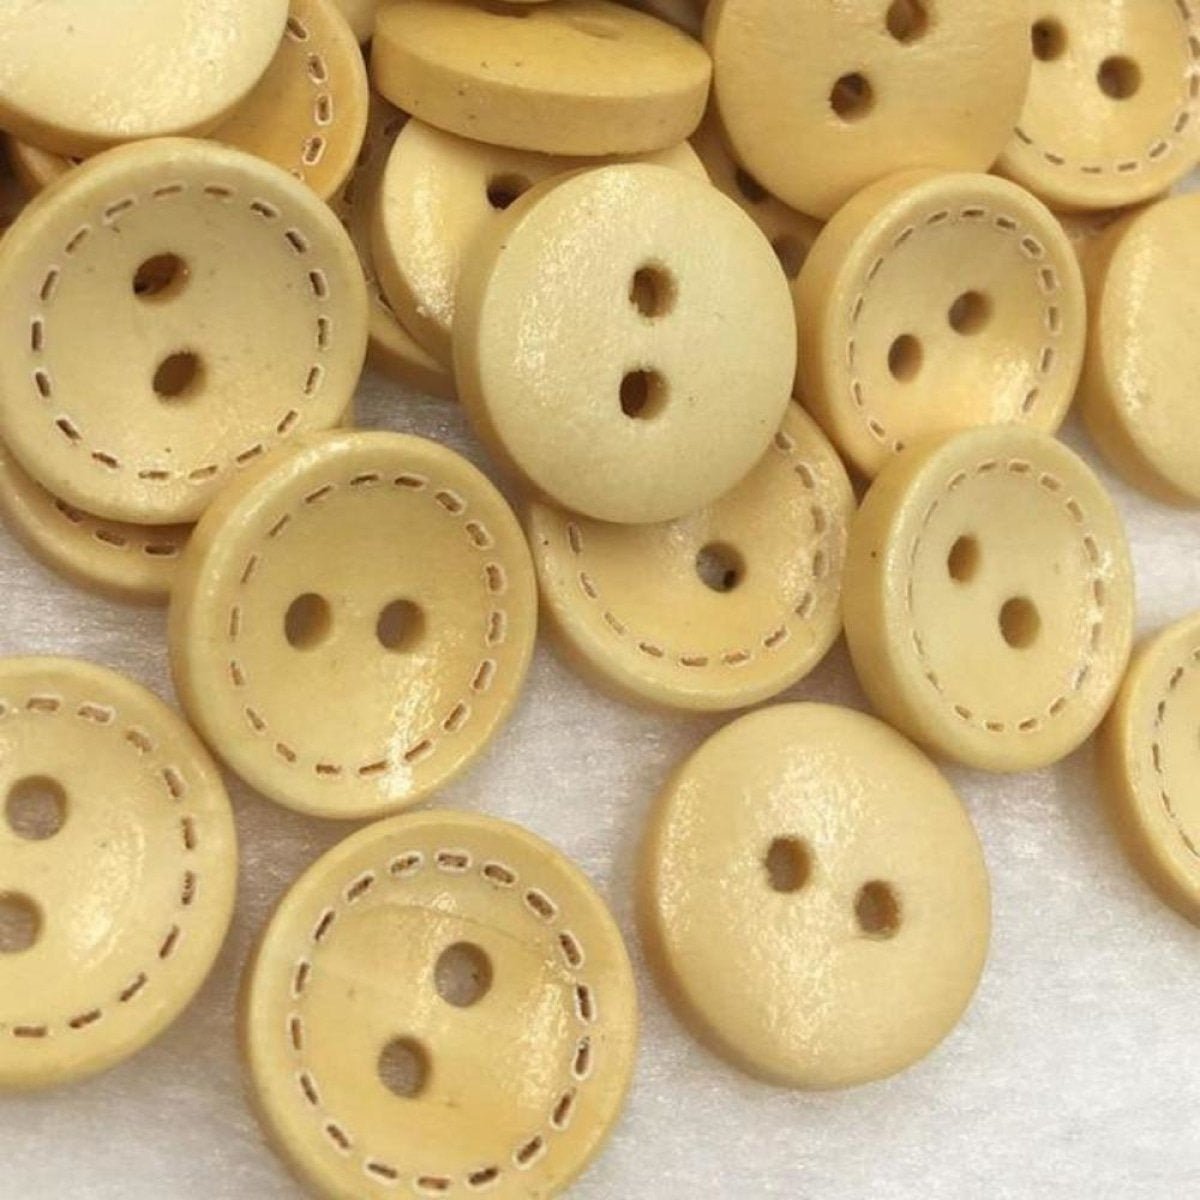 100pcs Mixed Wooden Buttons Flower for Clothing Craft Sewing DIY 2 Hole 15mm - Dashed Borders - - Asia Sell